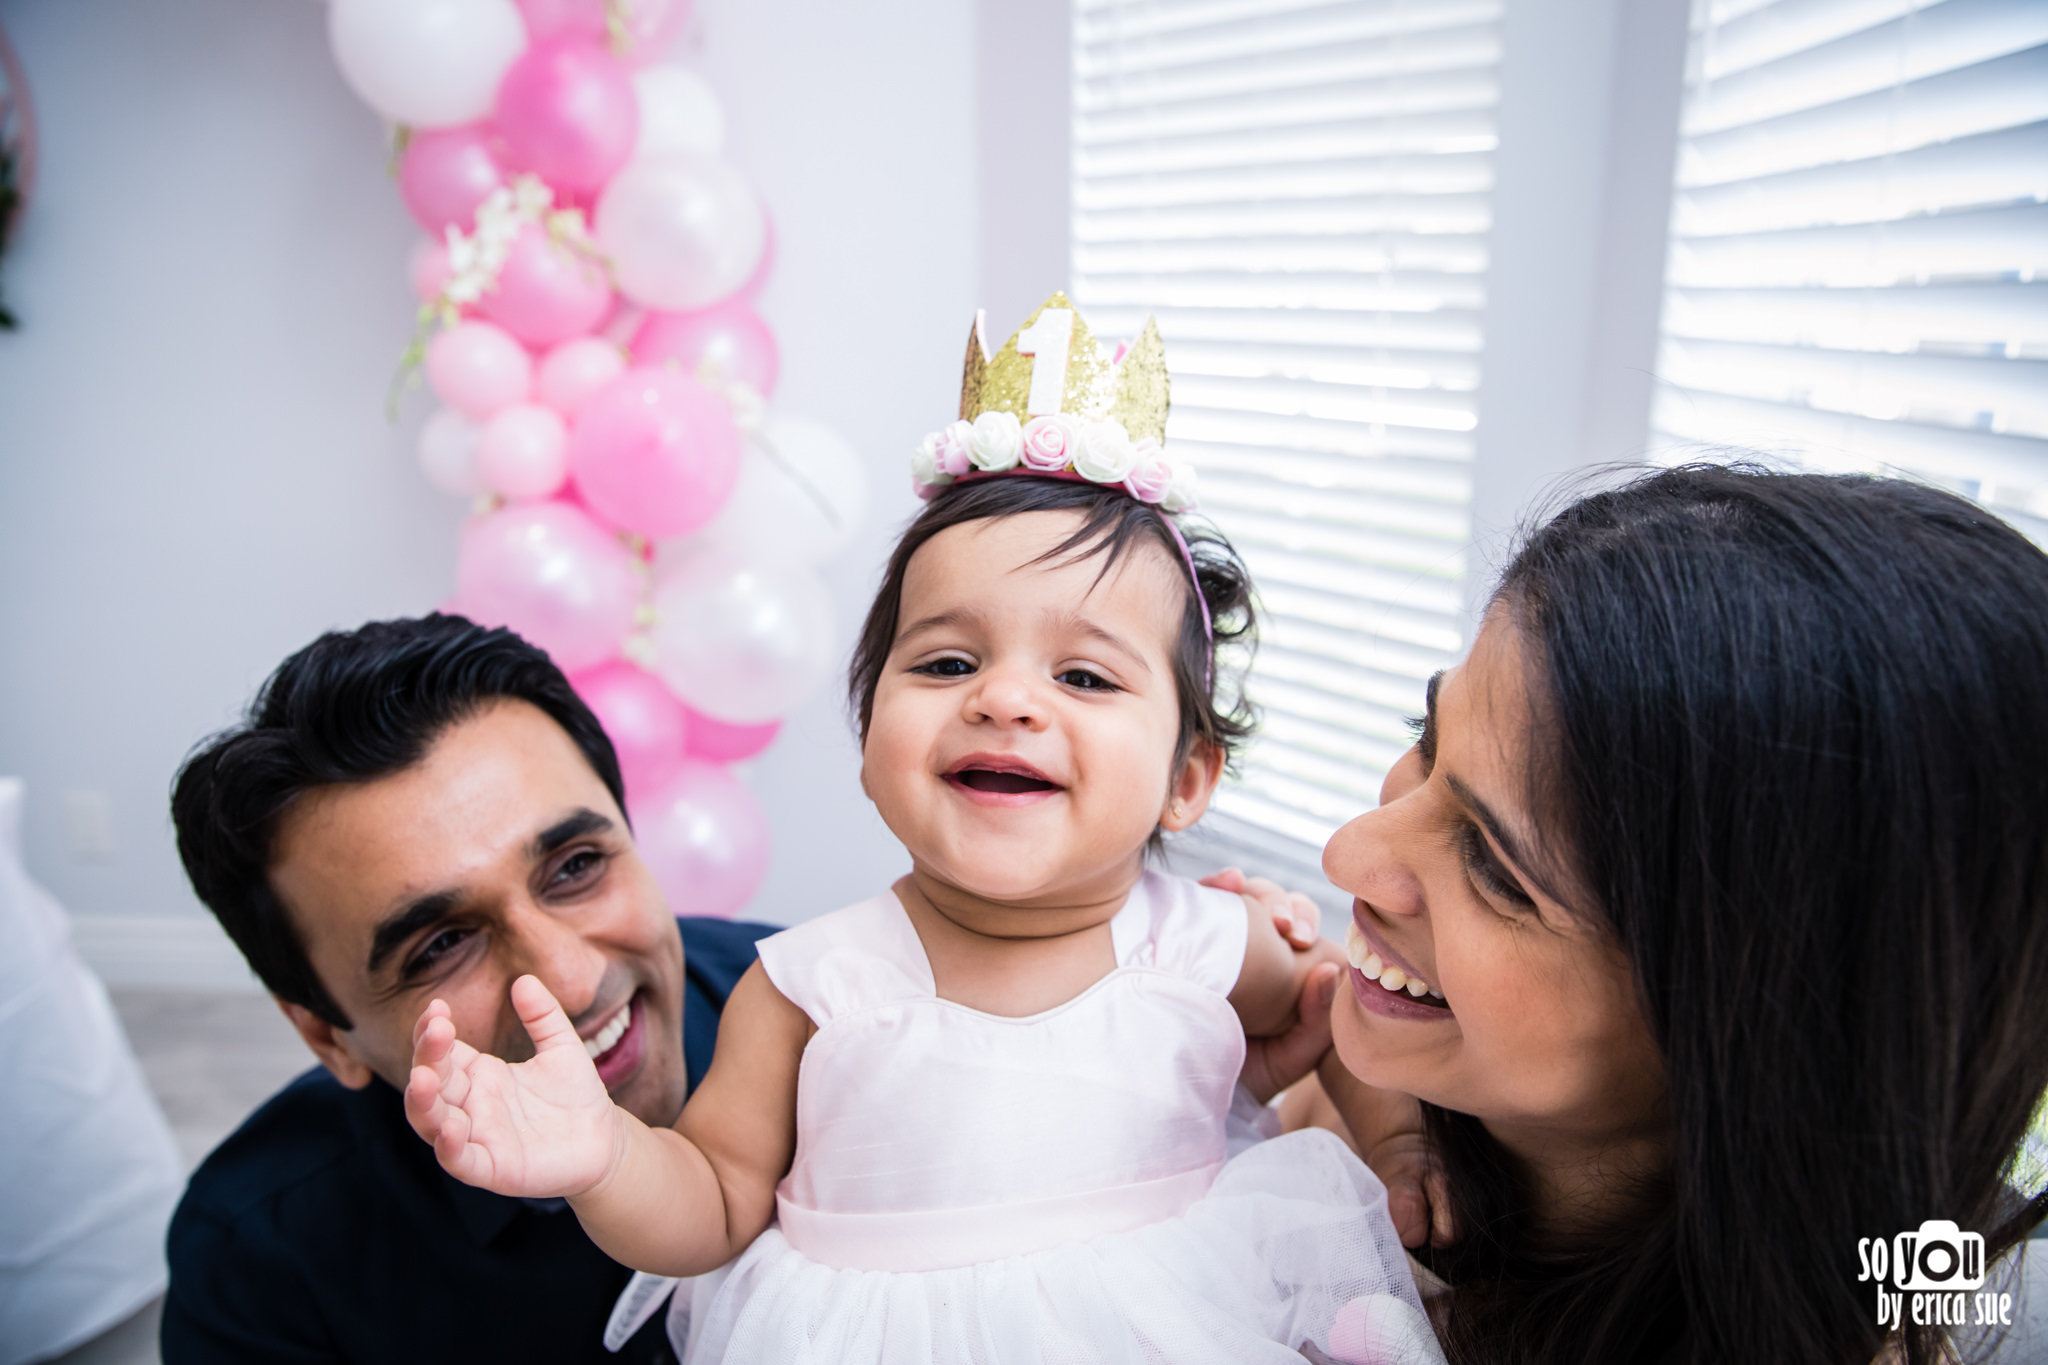 so-you-by-erica-sue-first-birthday-photographer-pembroke-pines-5572.jpg